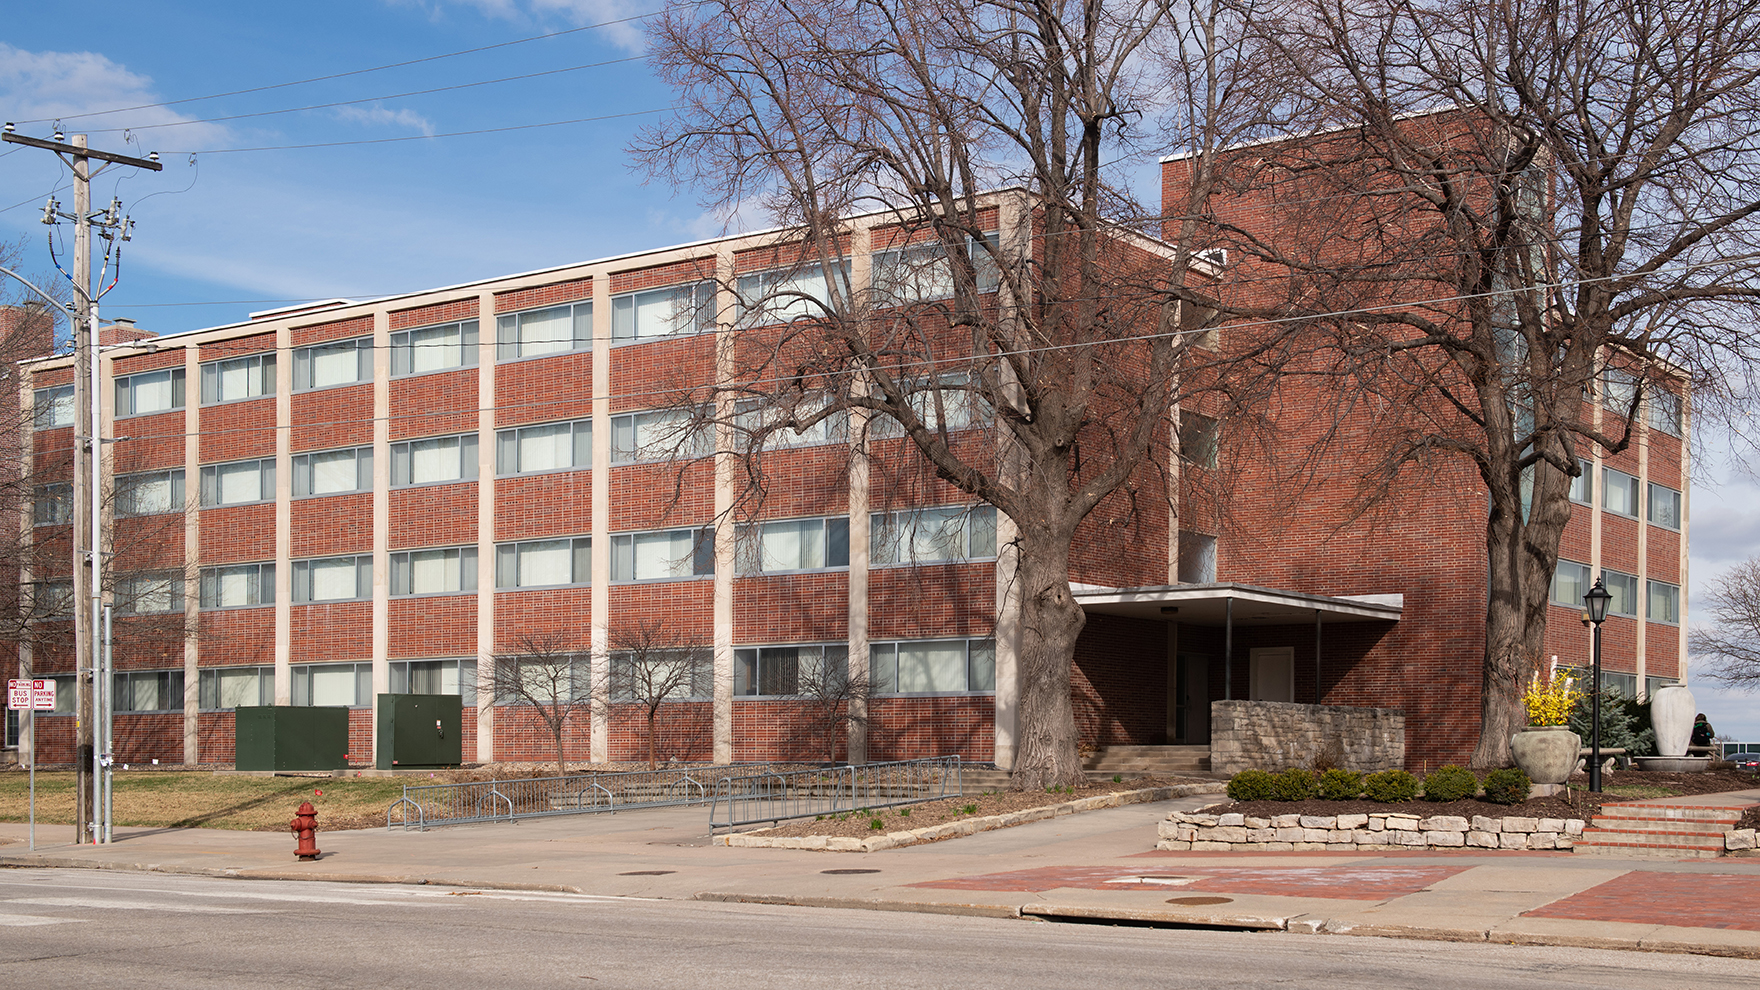 Piper Hall is scheduled for demolition during the university's winter shutdown. A construction fence is scheduled to be in place starting Dec. 12 and may block pedestrian traffic between 16th and 17th streets. The work will also impact parking on the east side of the building.